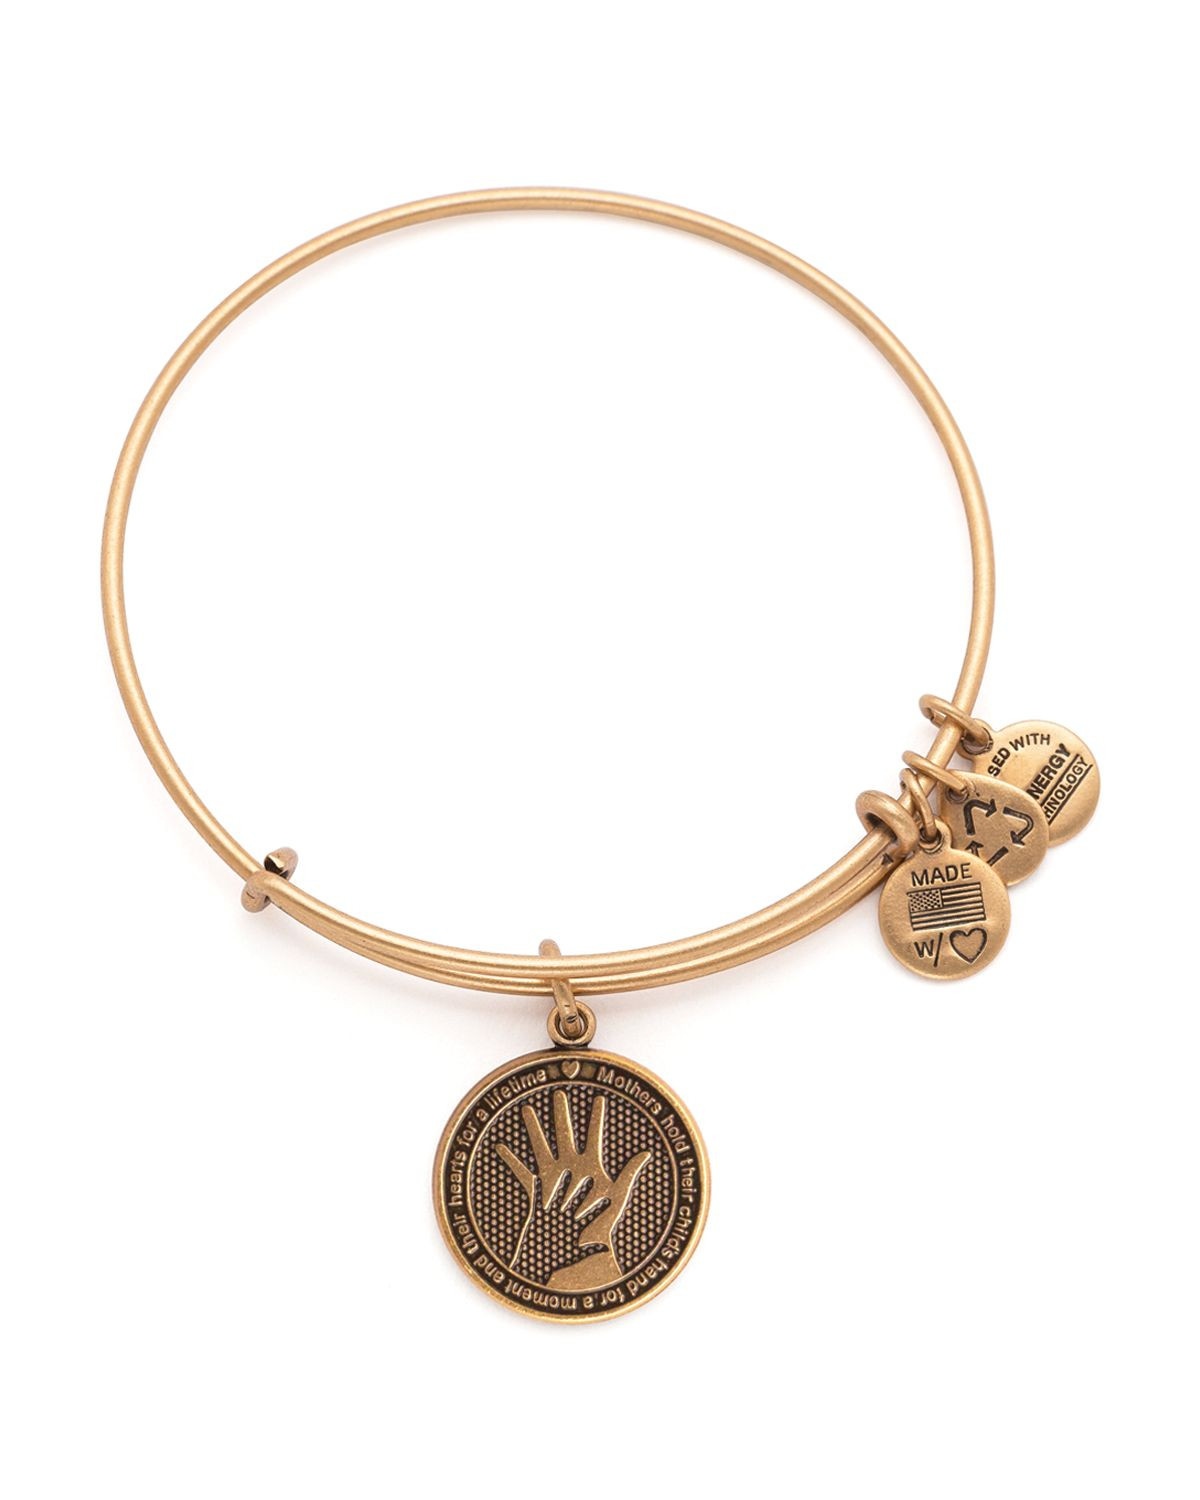 Alex And Ani Bracelets   Lyst Alex and ani Hand In Hand Expandable Wire Bangle in